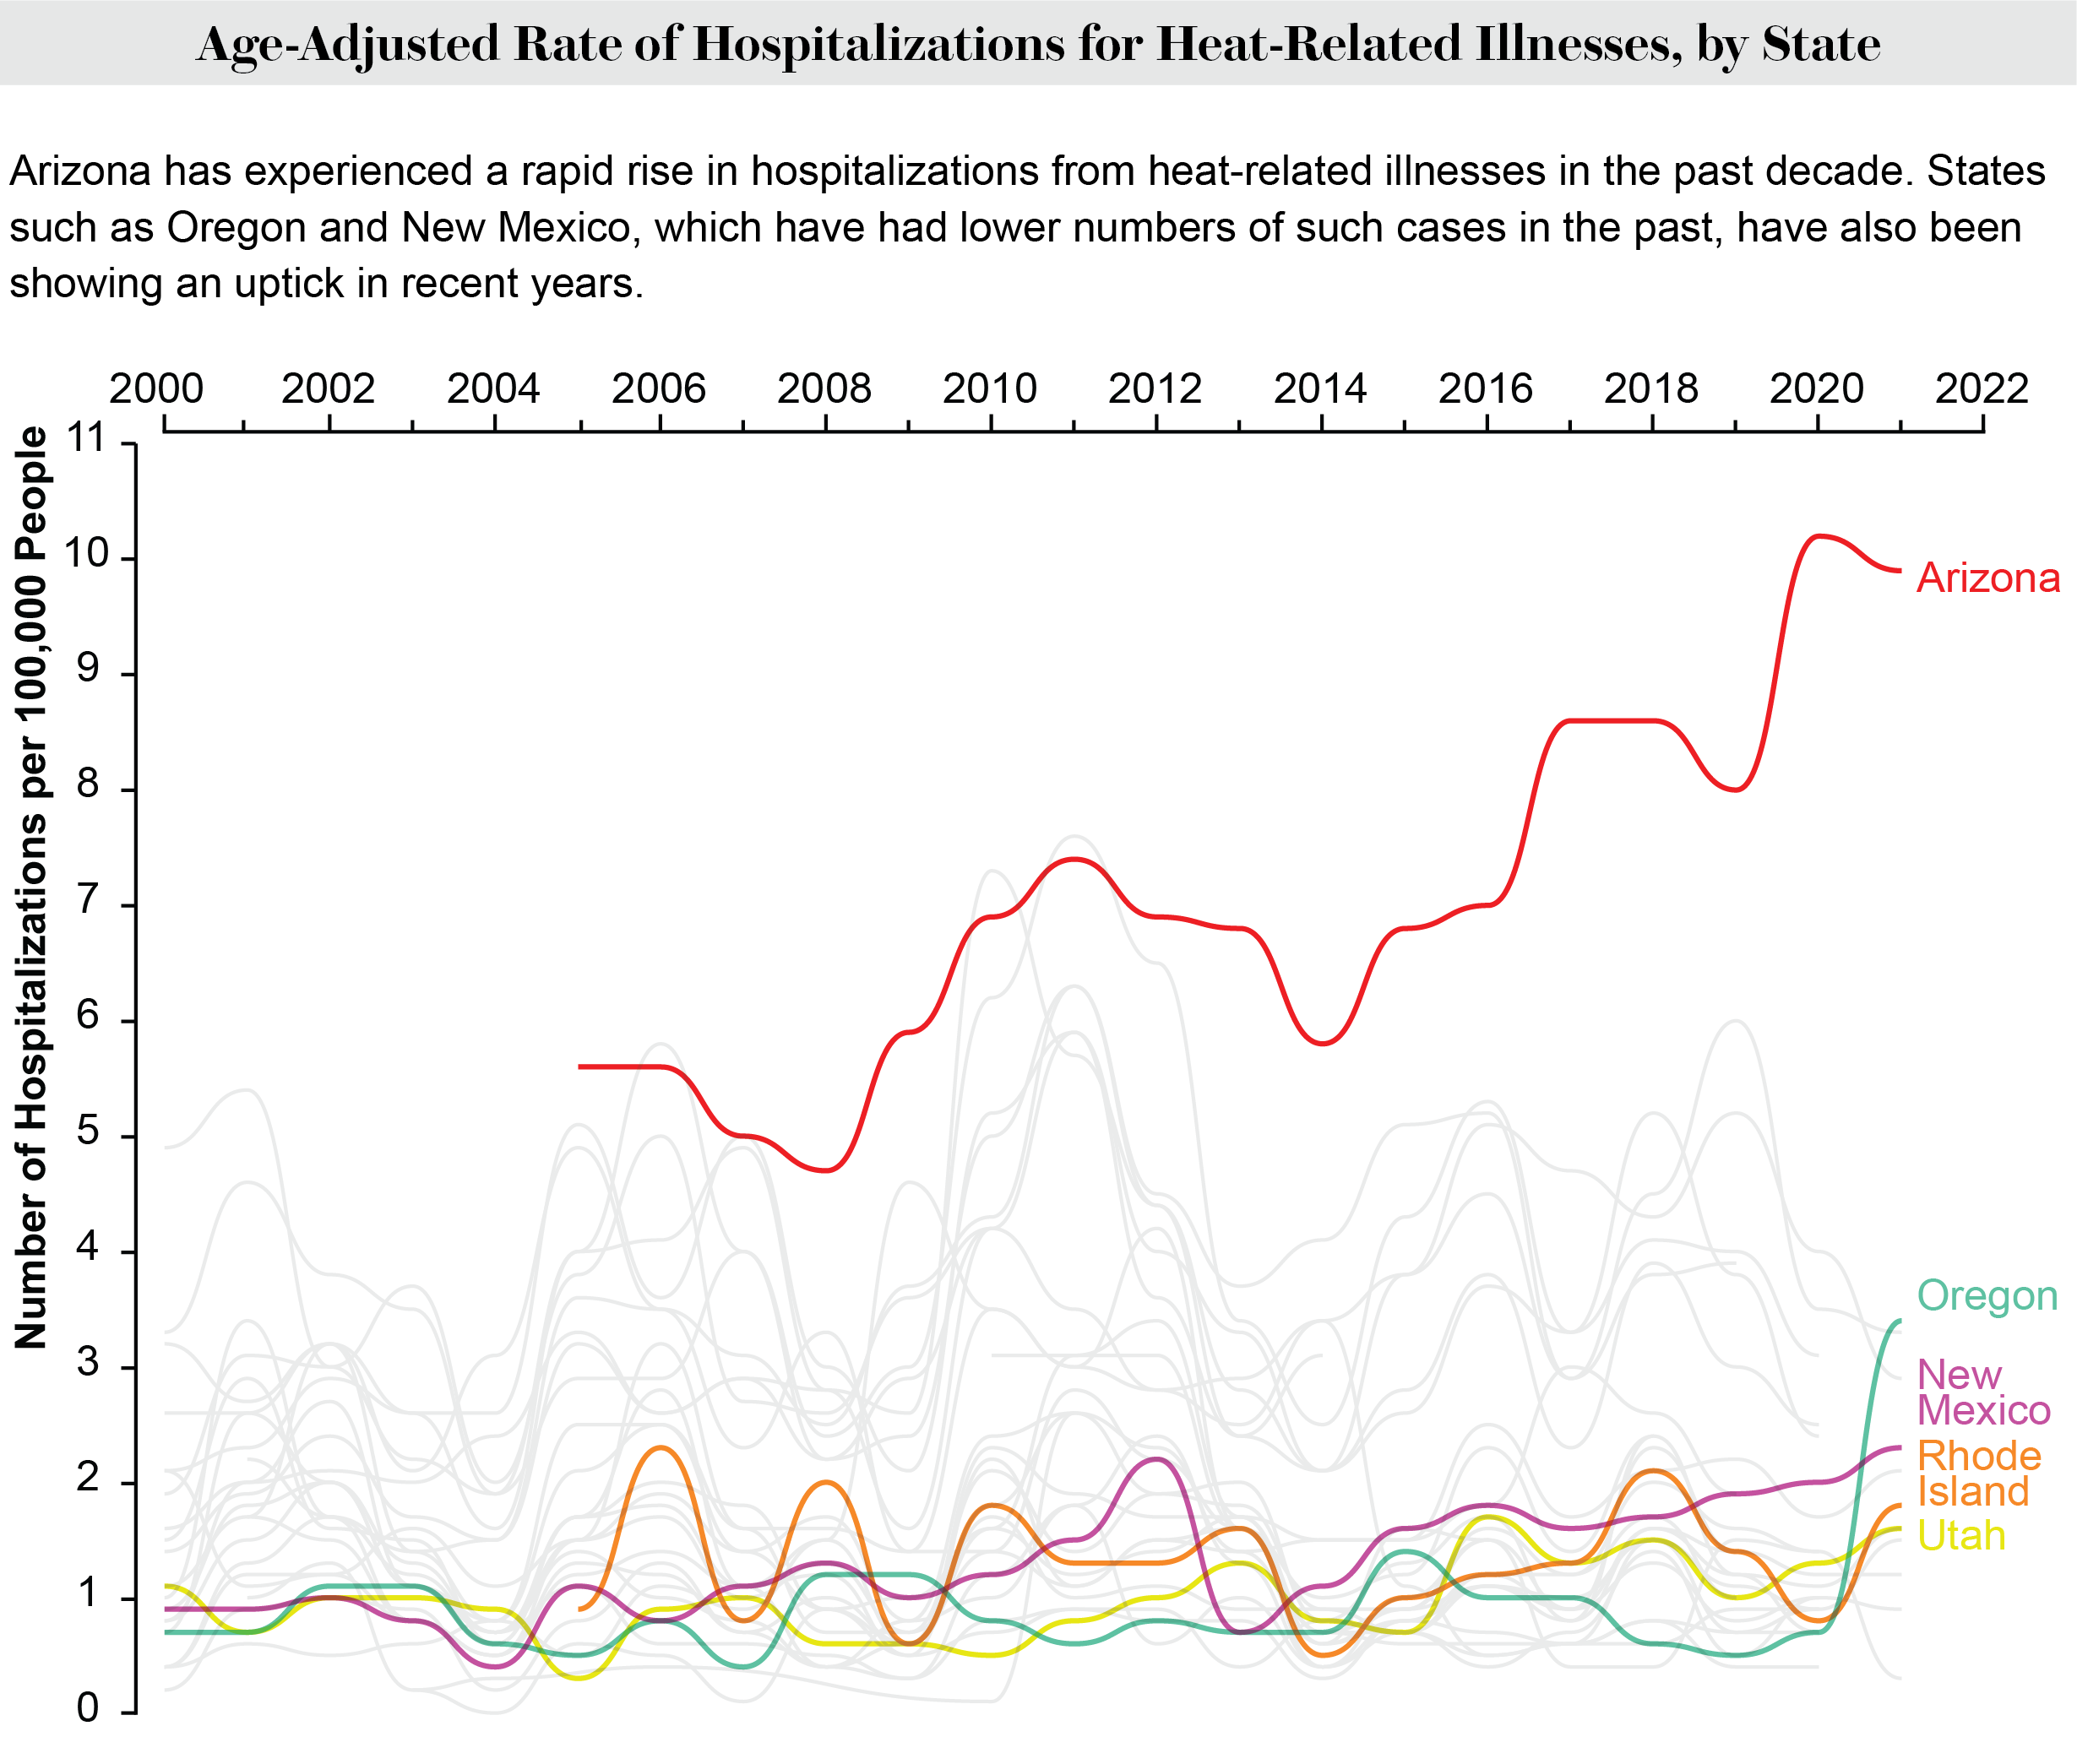 A line graph shows an age-adjusted rate of hospitalizations for heat-related illnesses, by state, from 2000 to 2022.